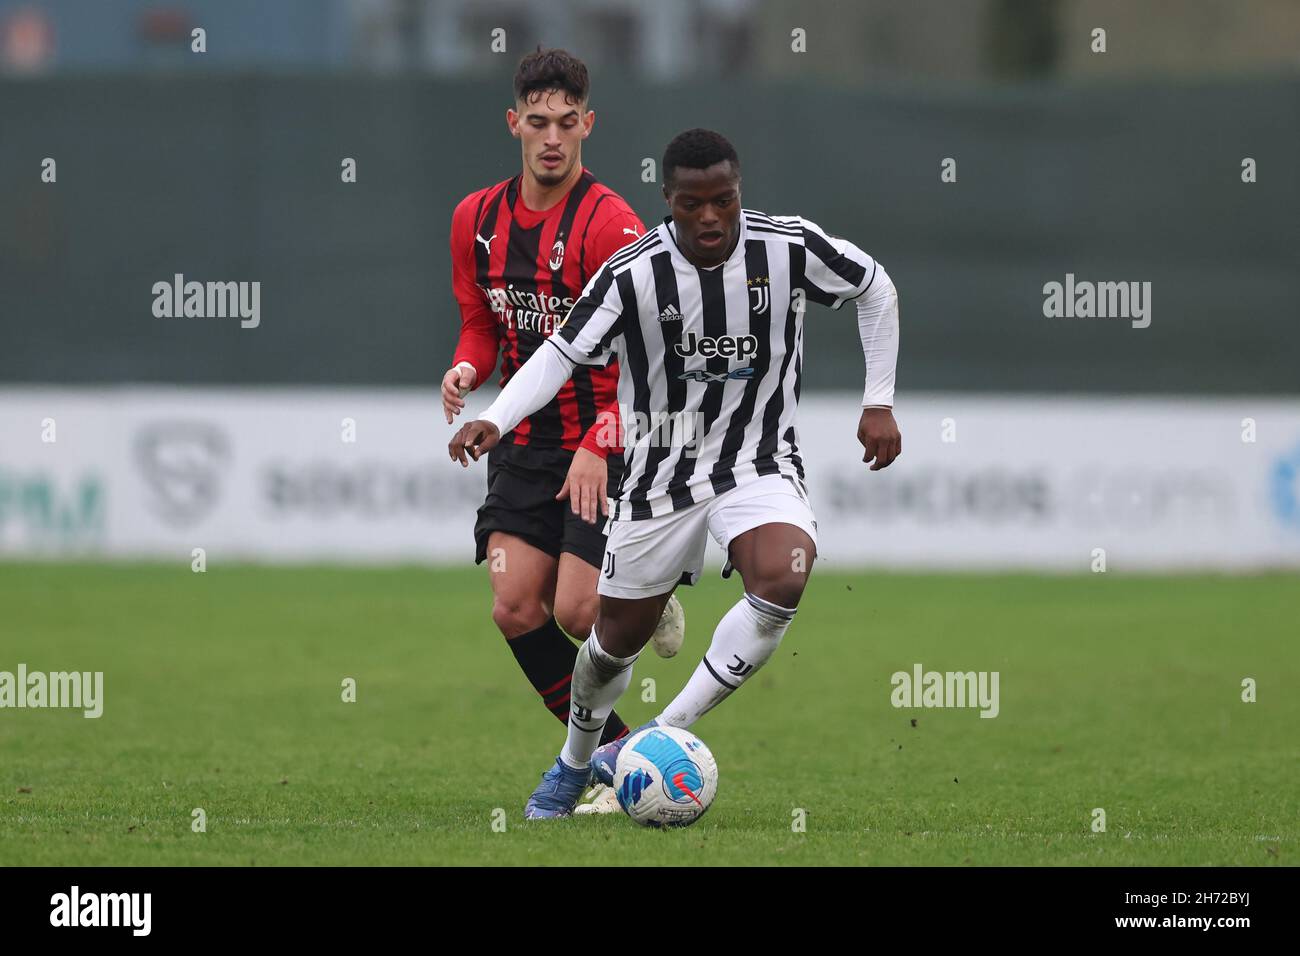 Milan, Italy, 19th November 2021. Ange Josue Chibozo of Juventus is pursued  by Andrea Capone of AC Milan during the Campionato Primavera match at  Centro Sportivo Vismara, Milan. Picture credit should read: